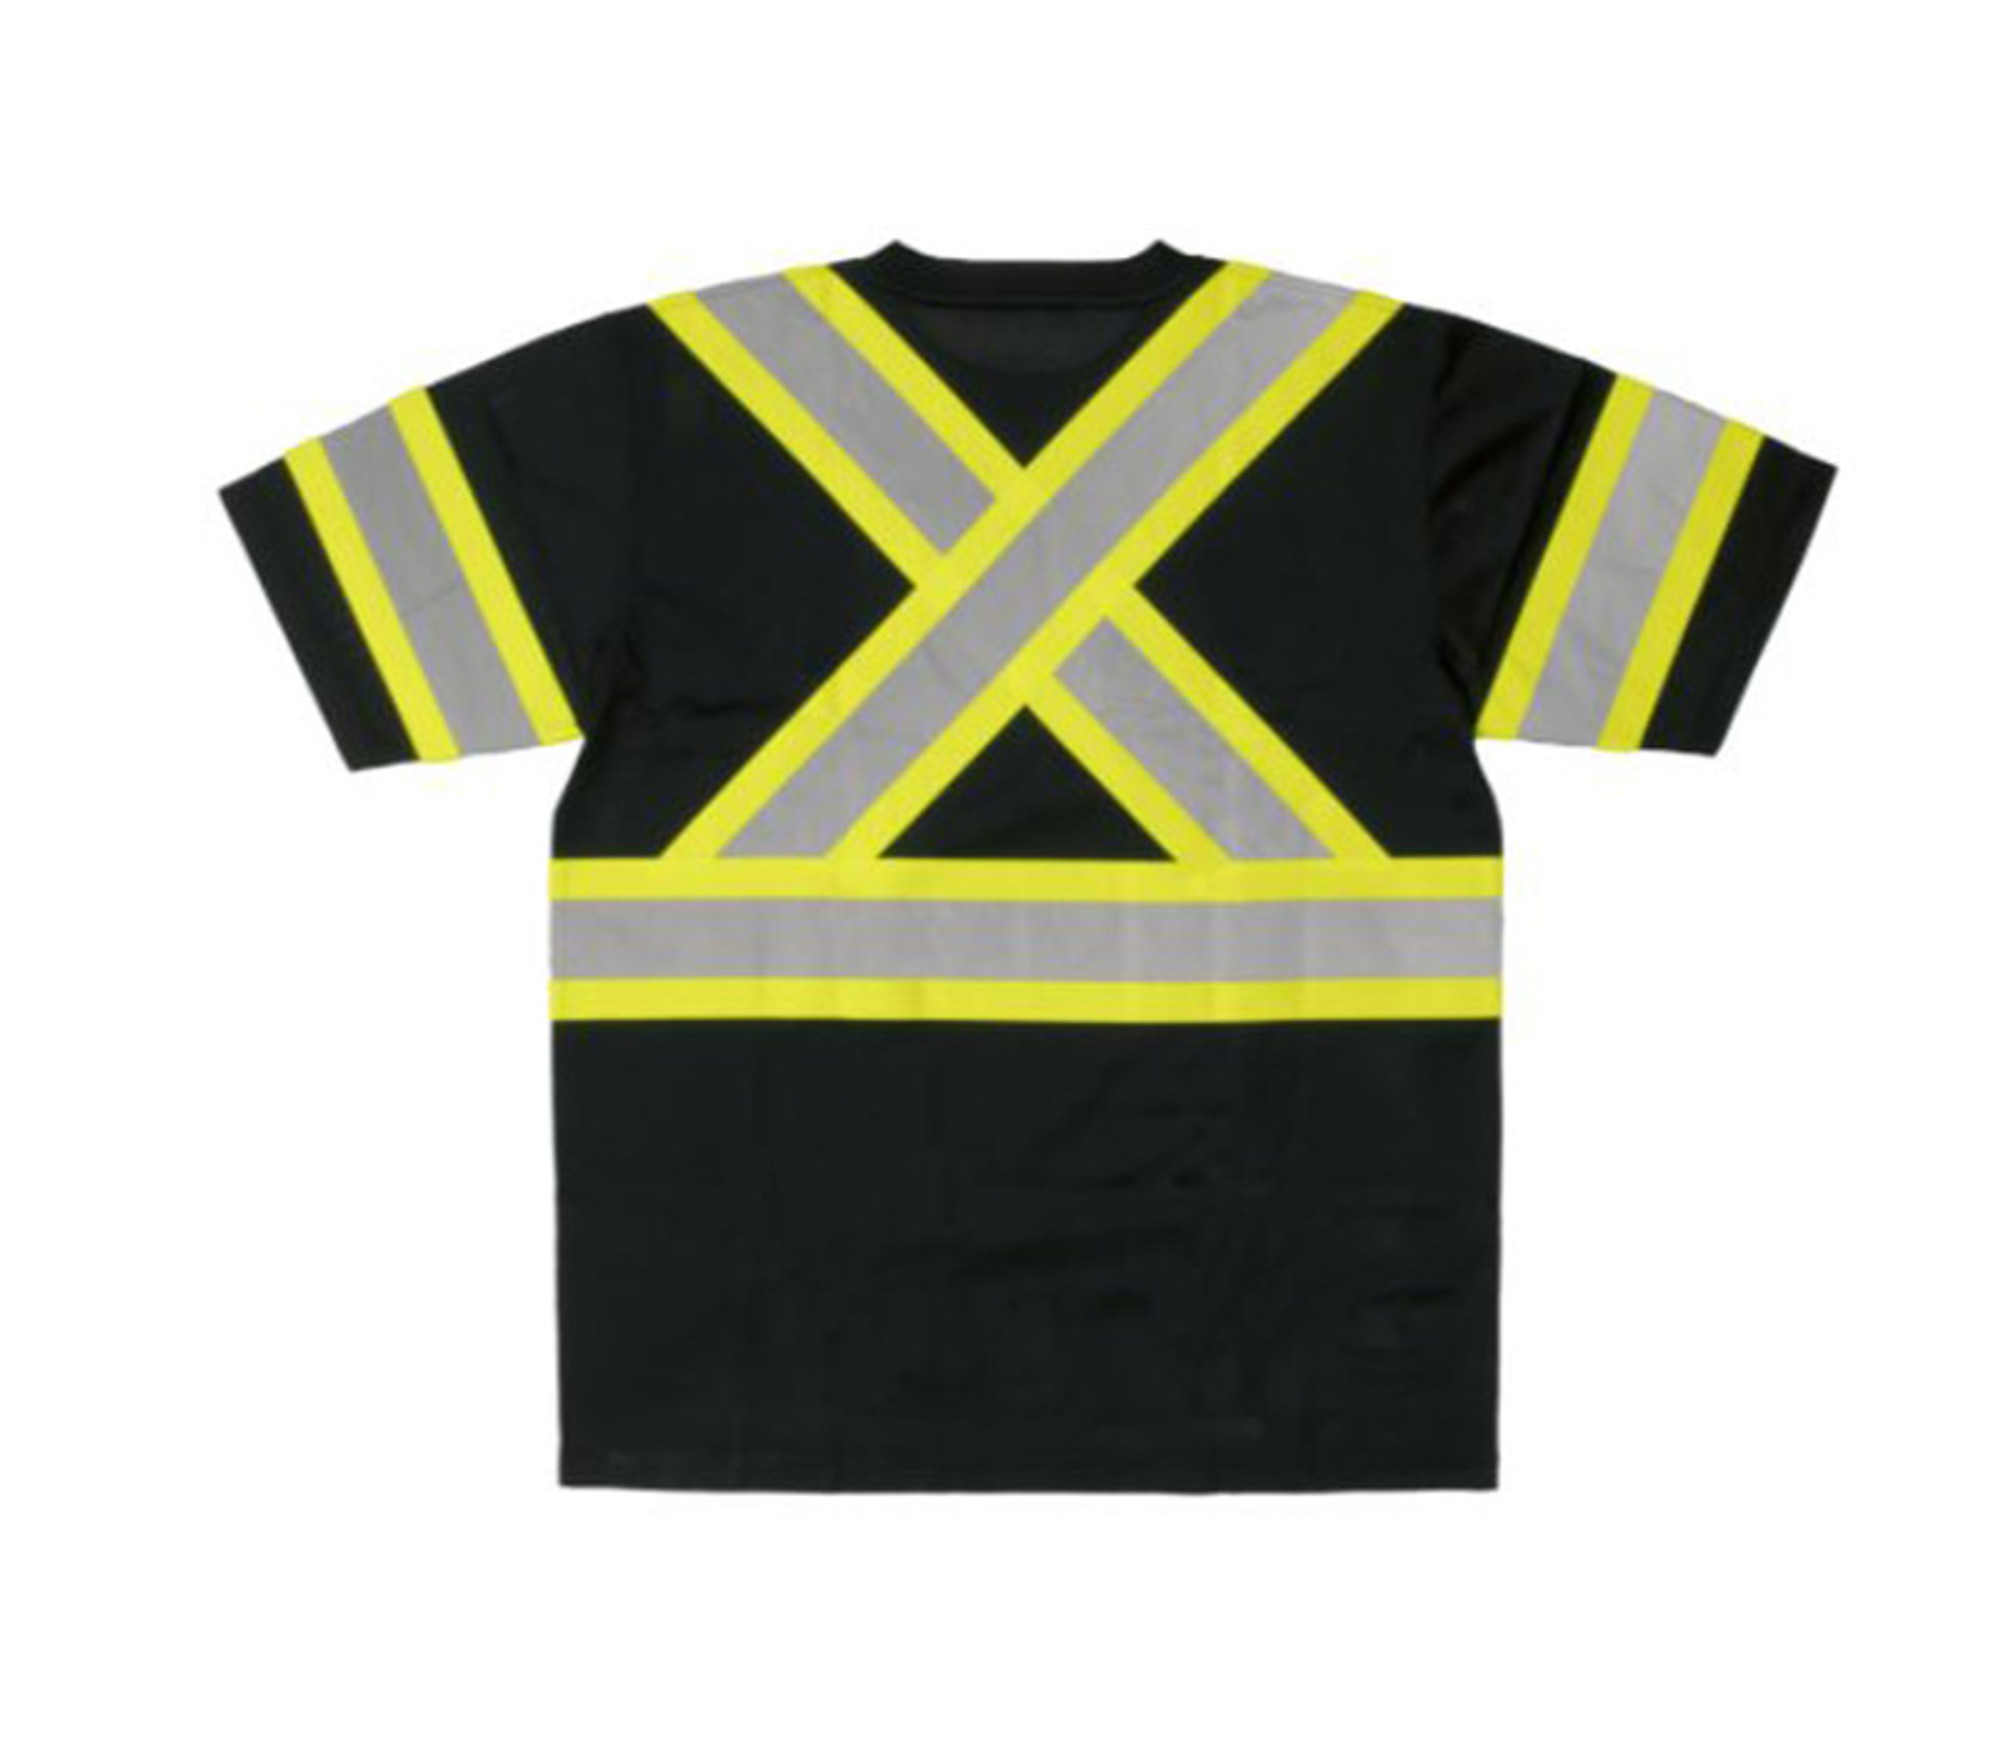 S/S Safety T-Shirt (Black) - 4 Pack